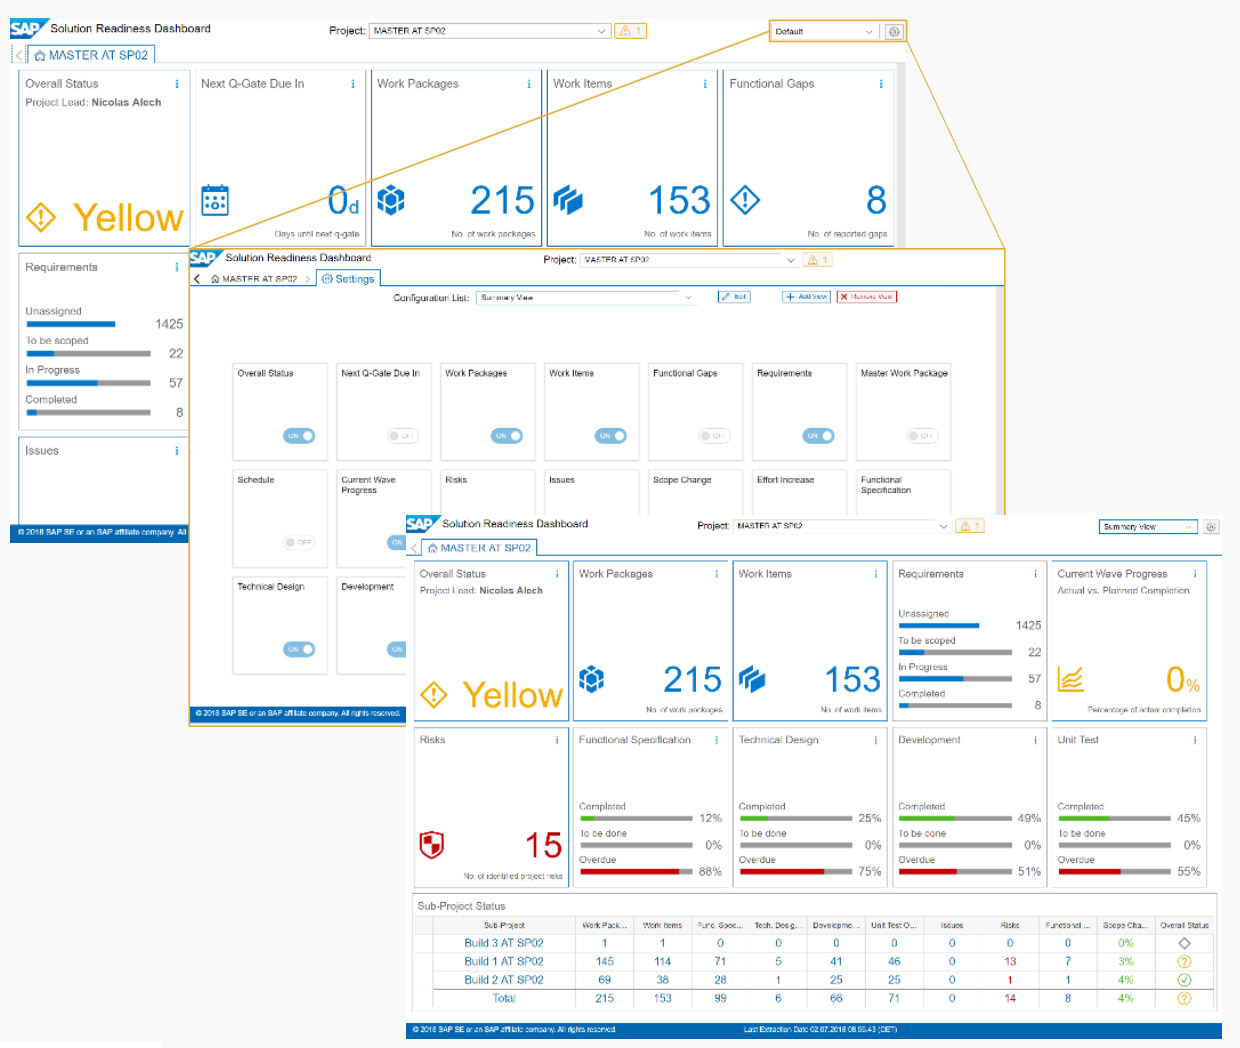 SAP Focused Build - Readiness Dashboard for PMOs